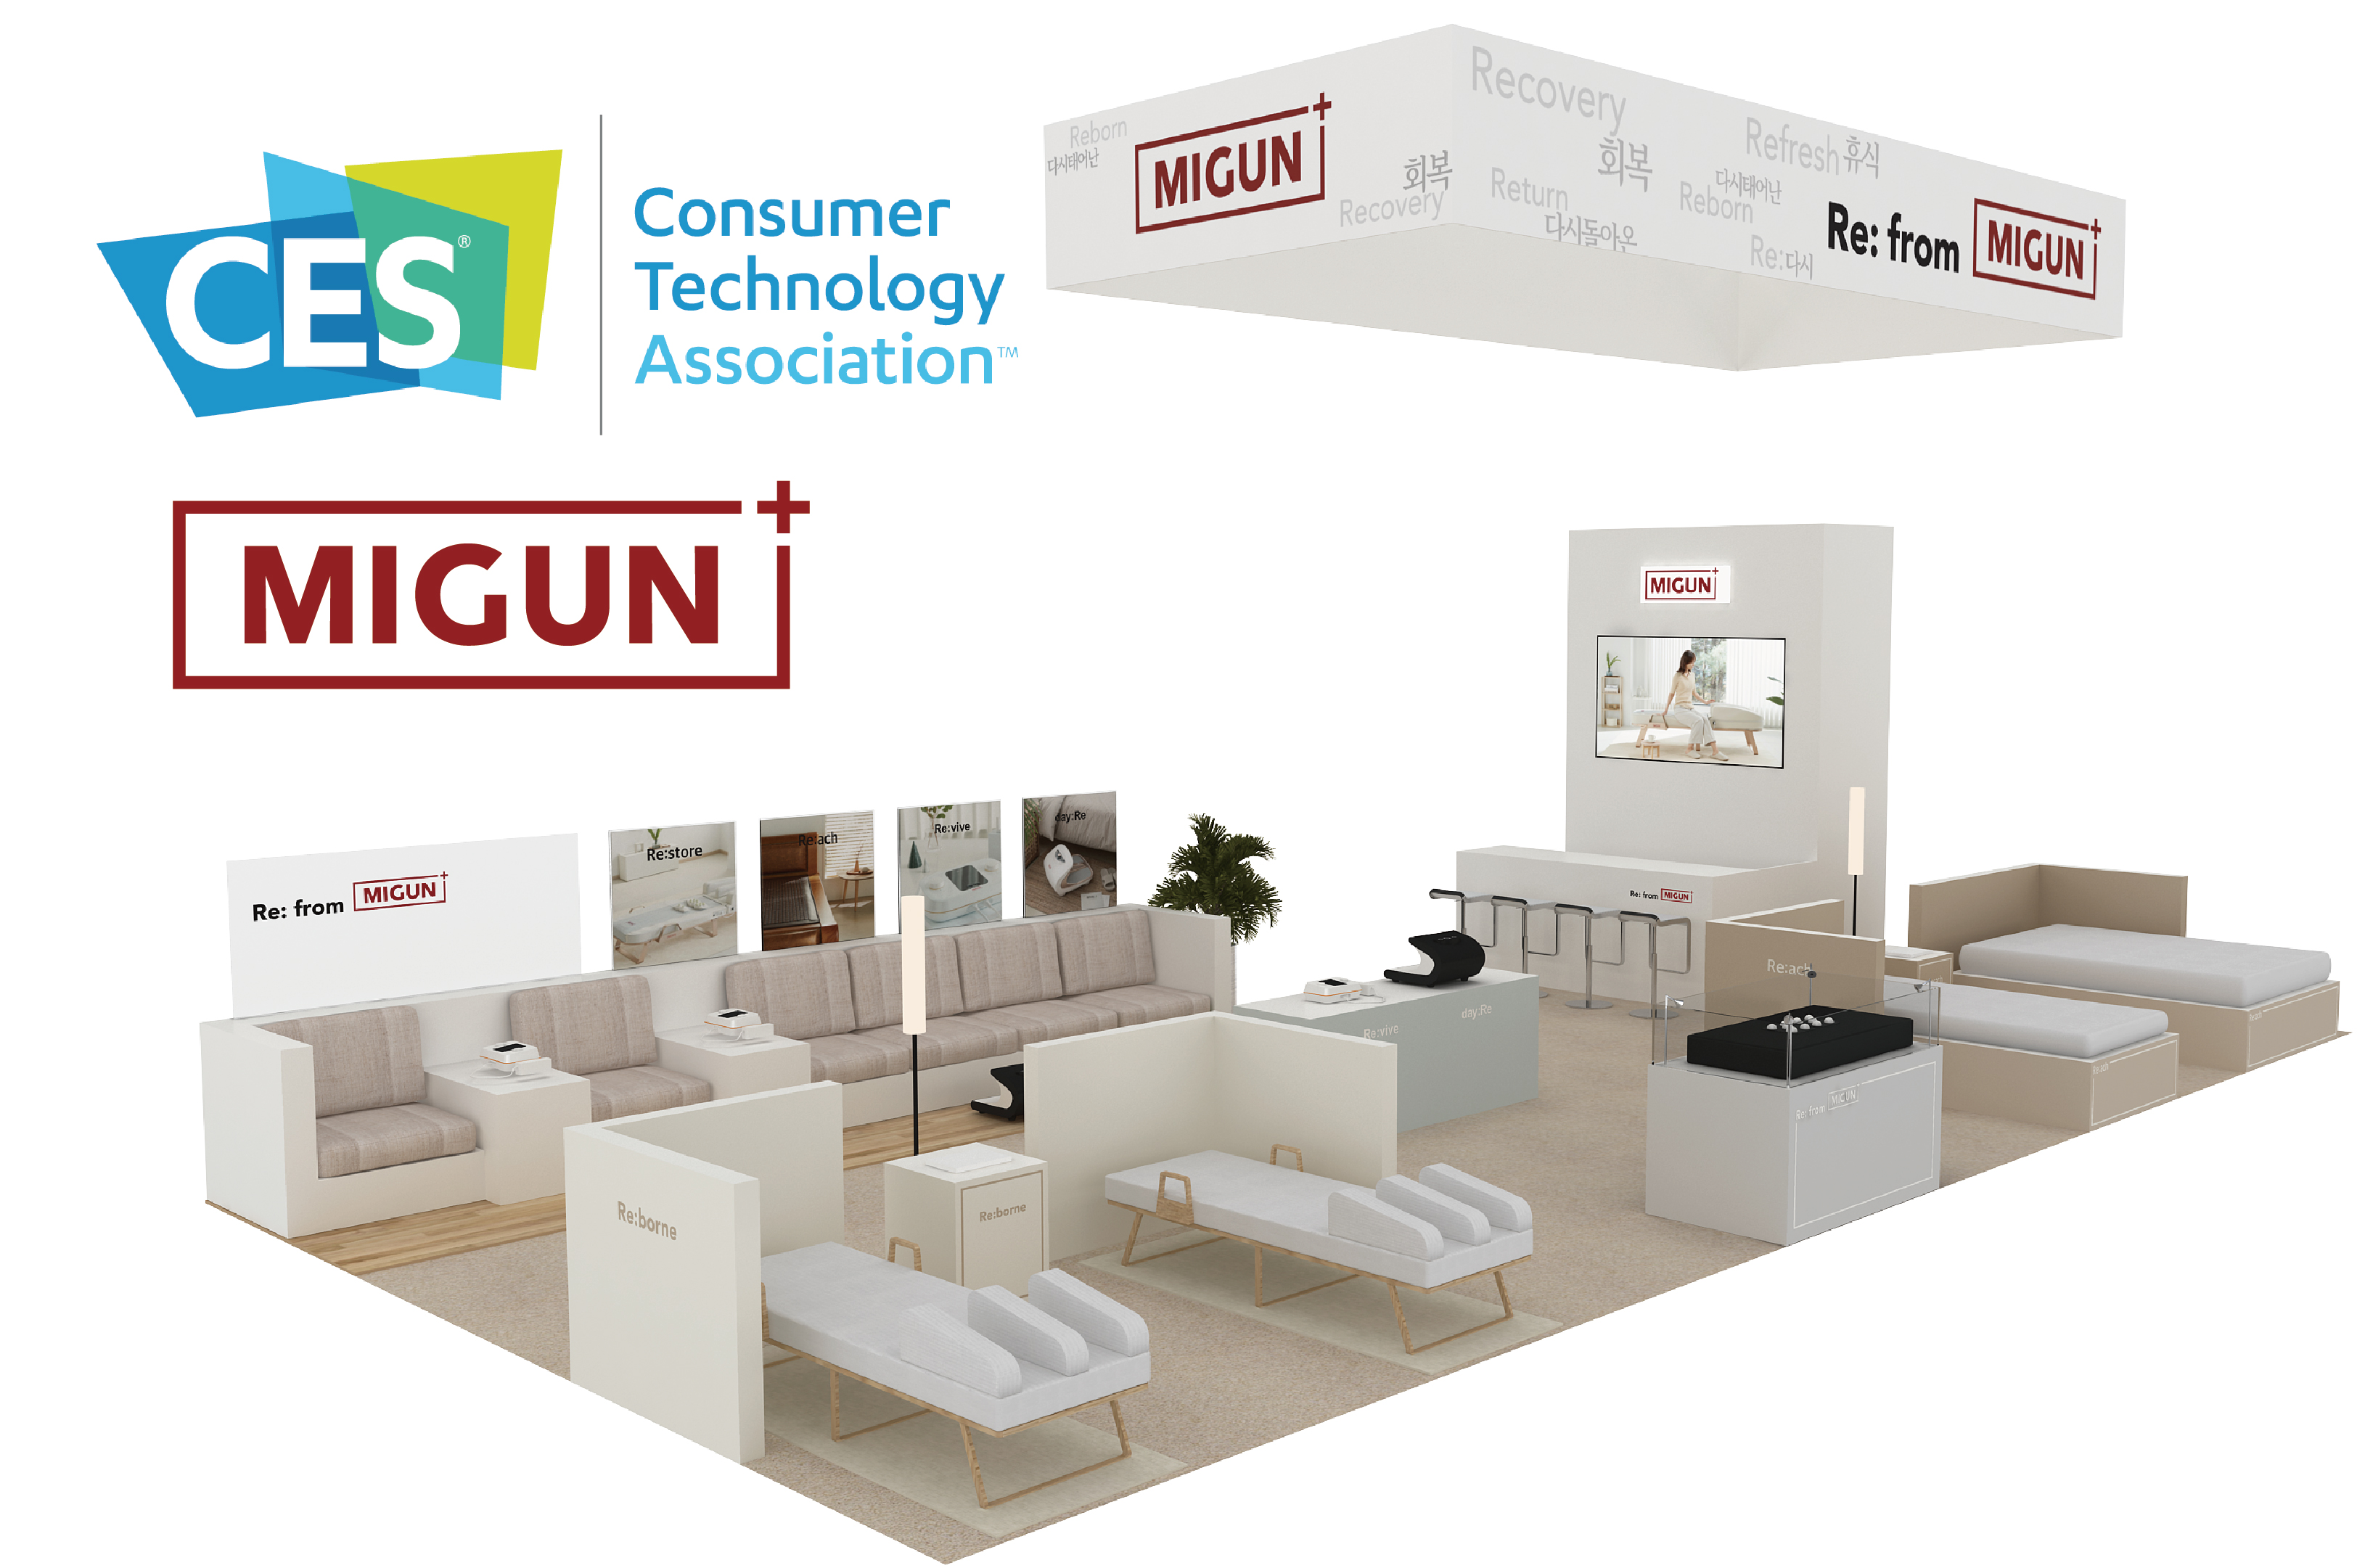 MIGUN LIFE's New Personal Healthcare Products Are Unveiled, Heralding the Grand First Debut of CES 2023